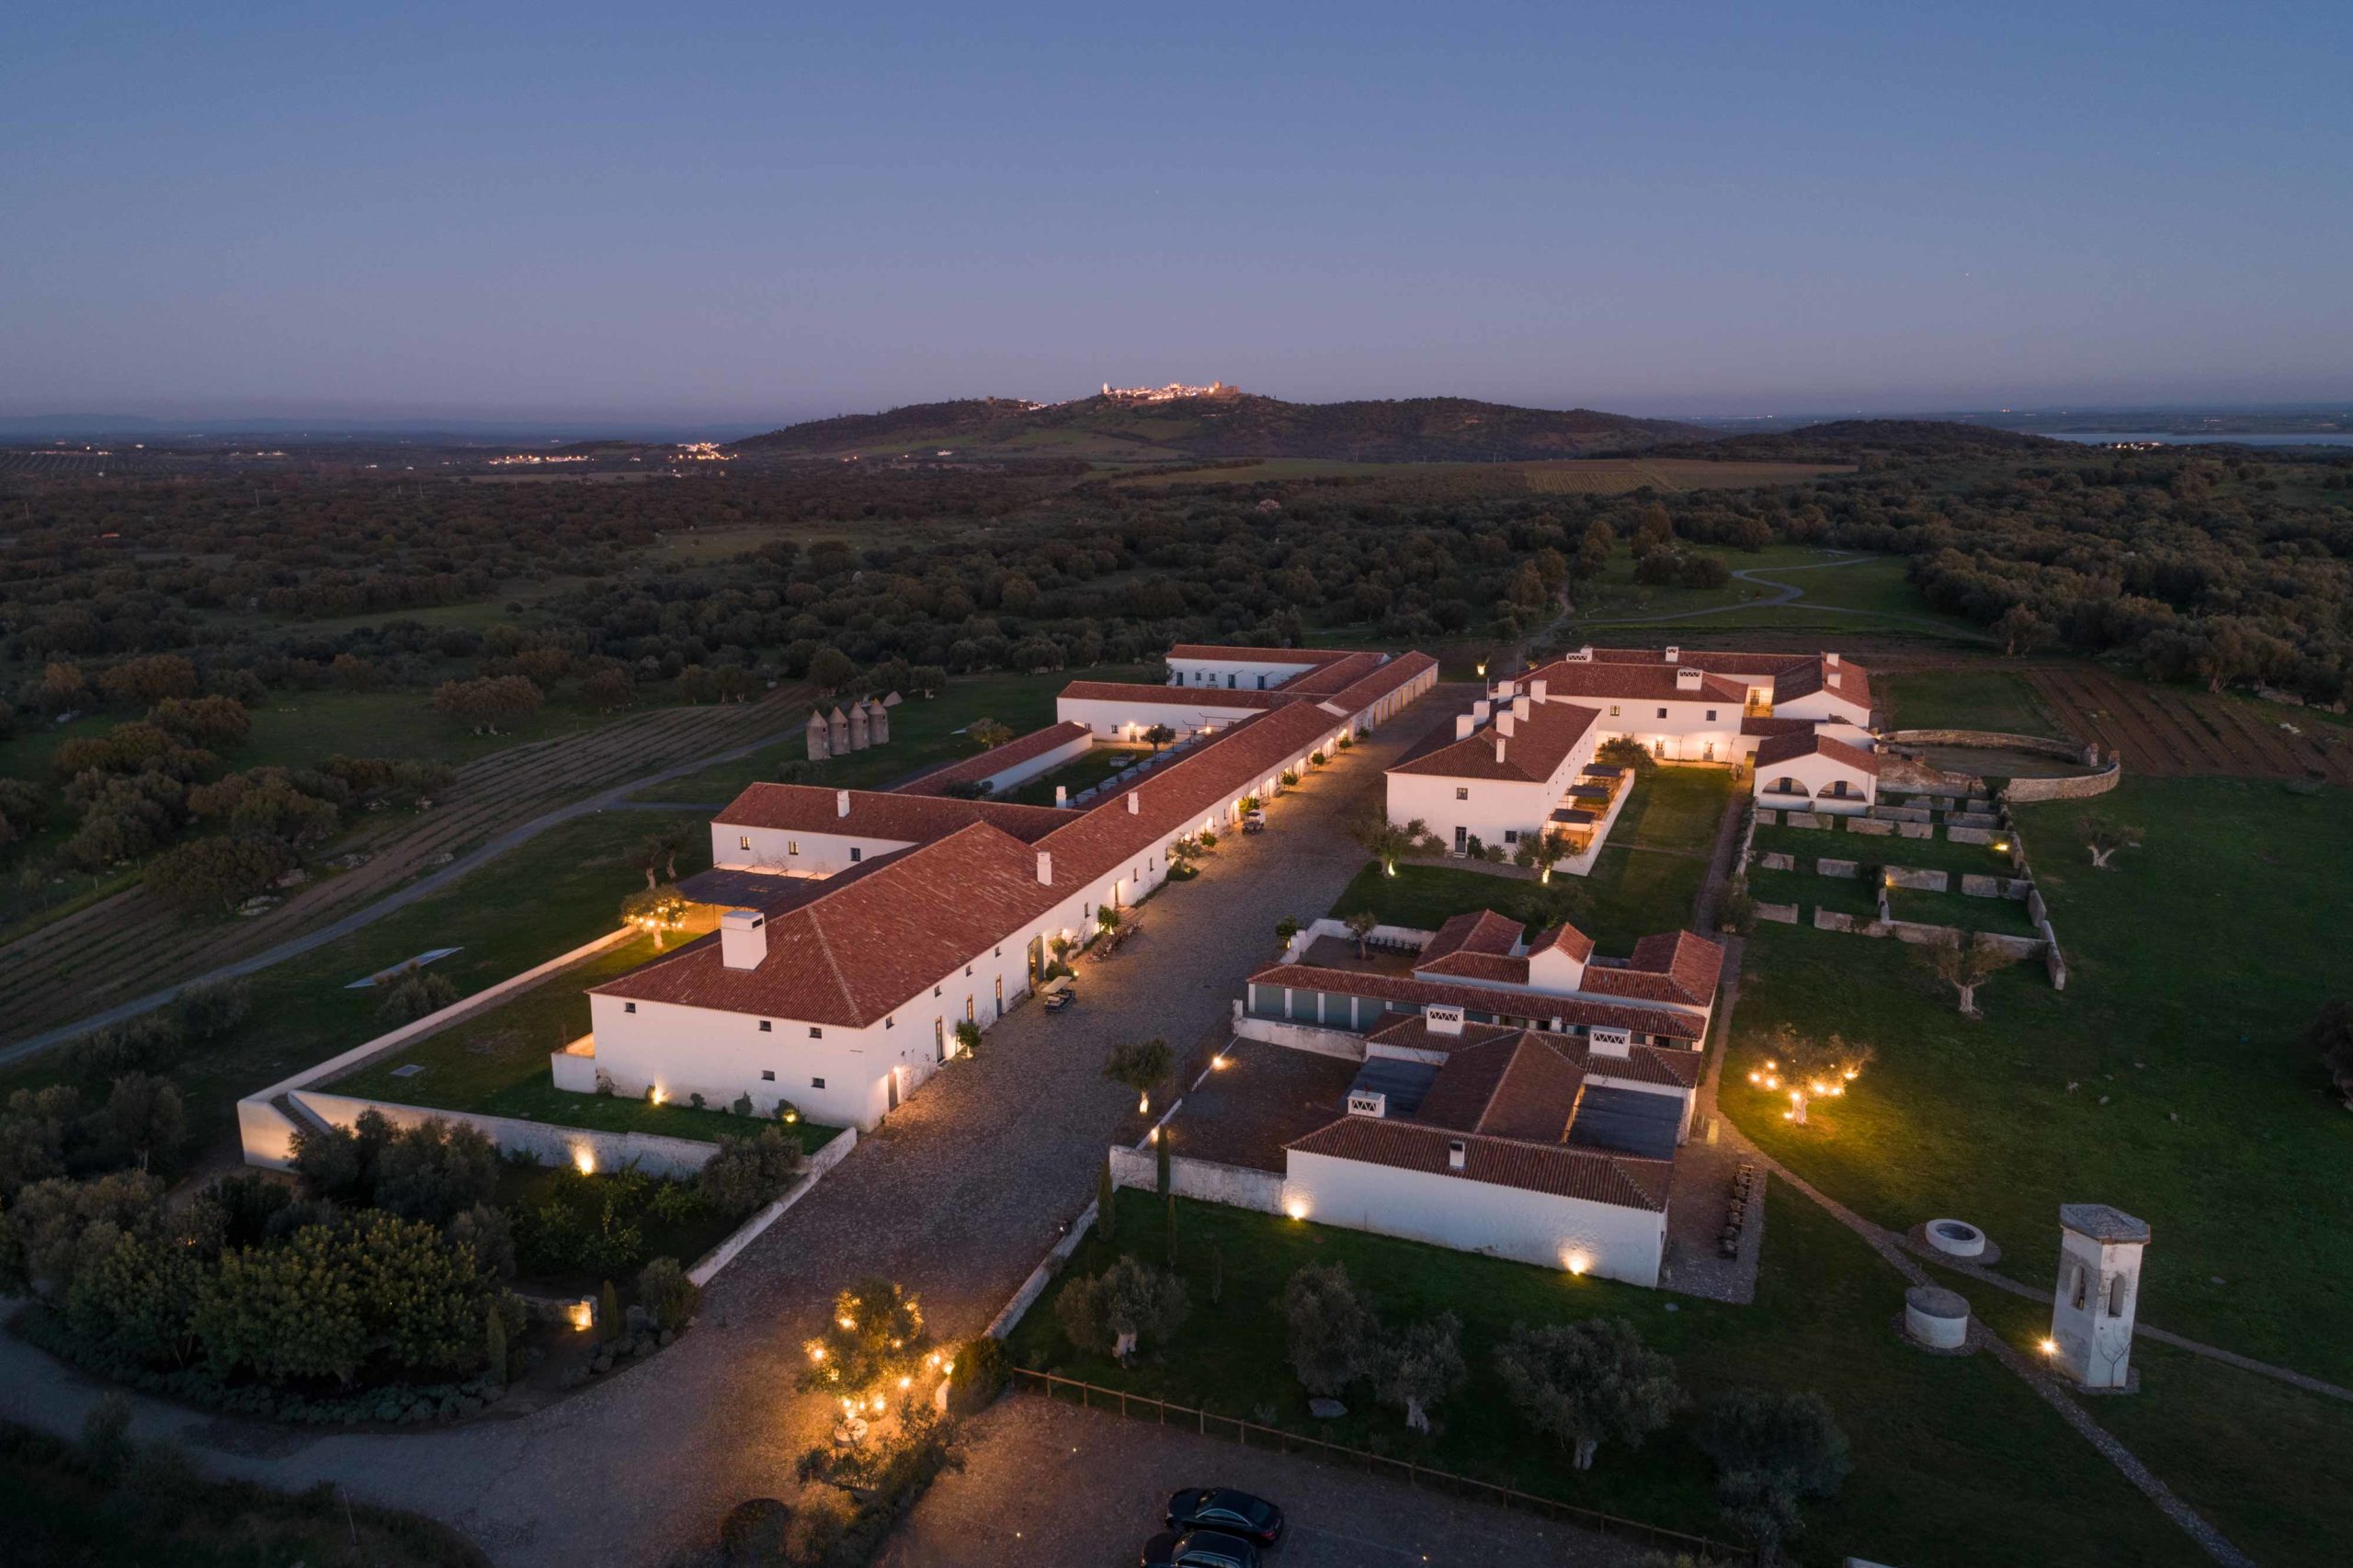 São Lourenço do Barrocal, the 200-year-old estate that once housed 50 families, lit up at night